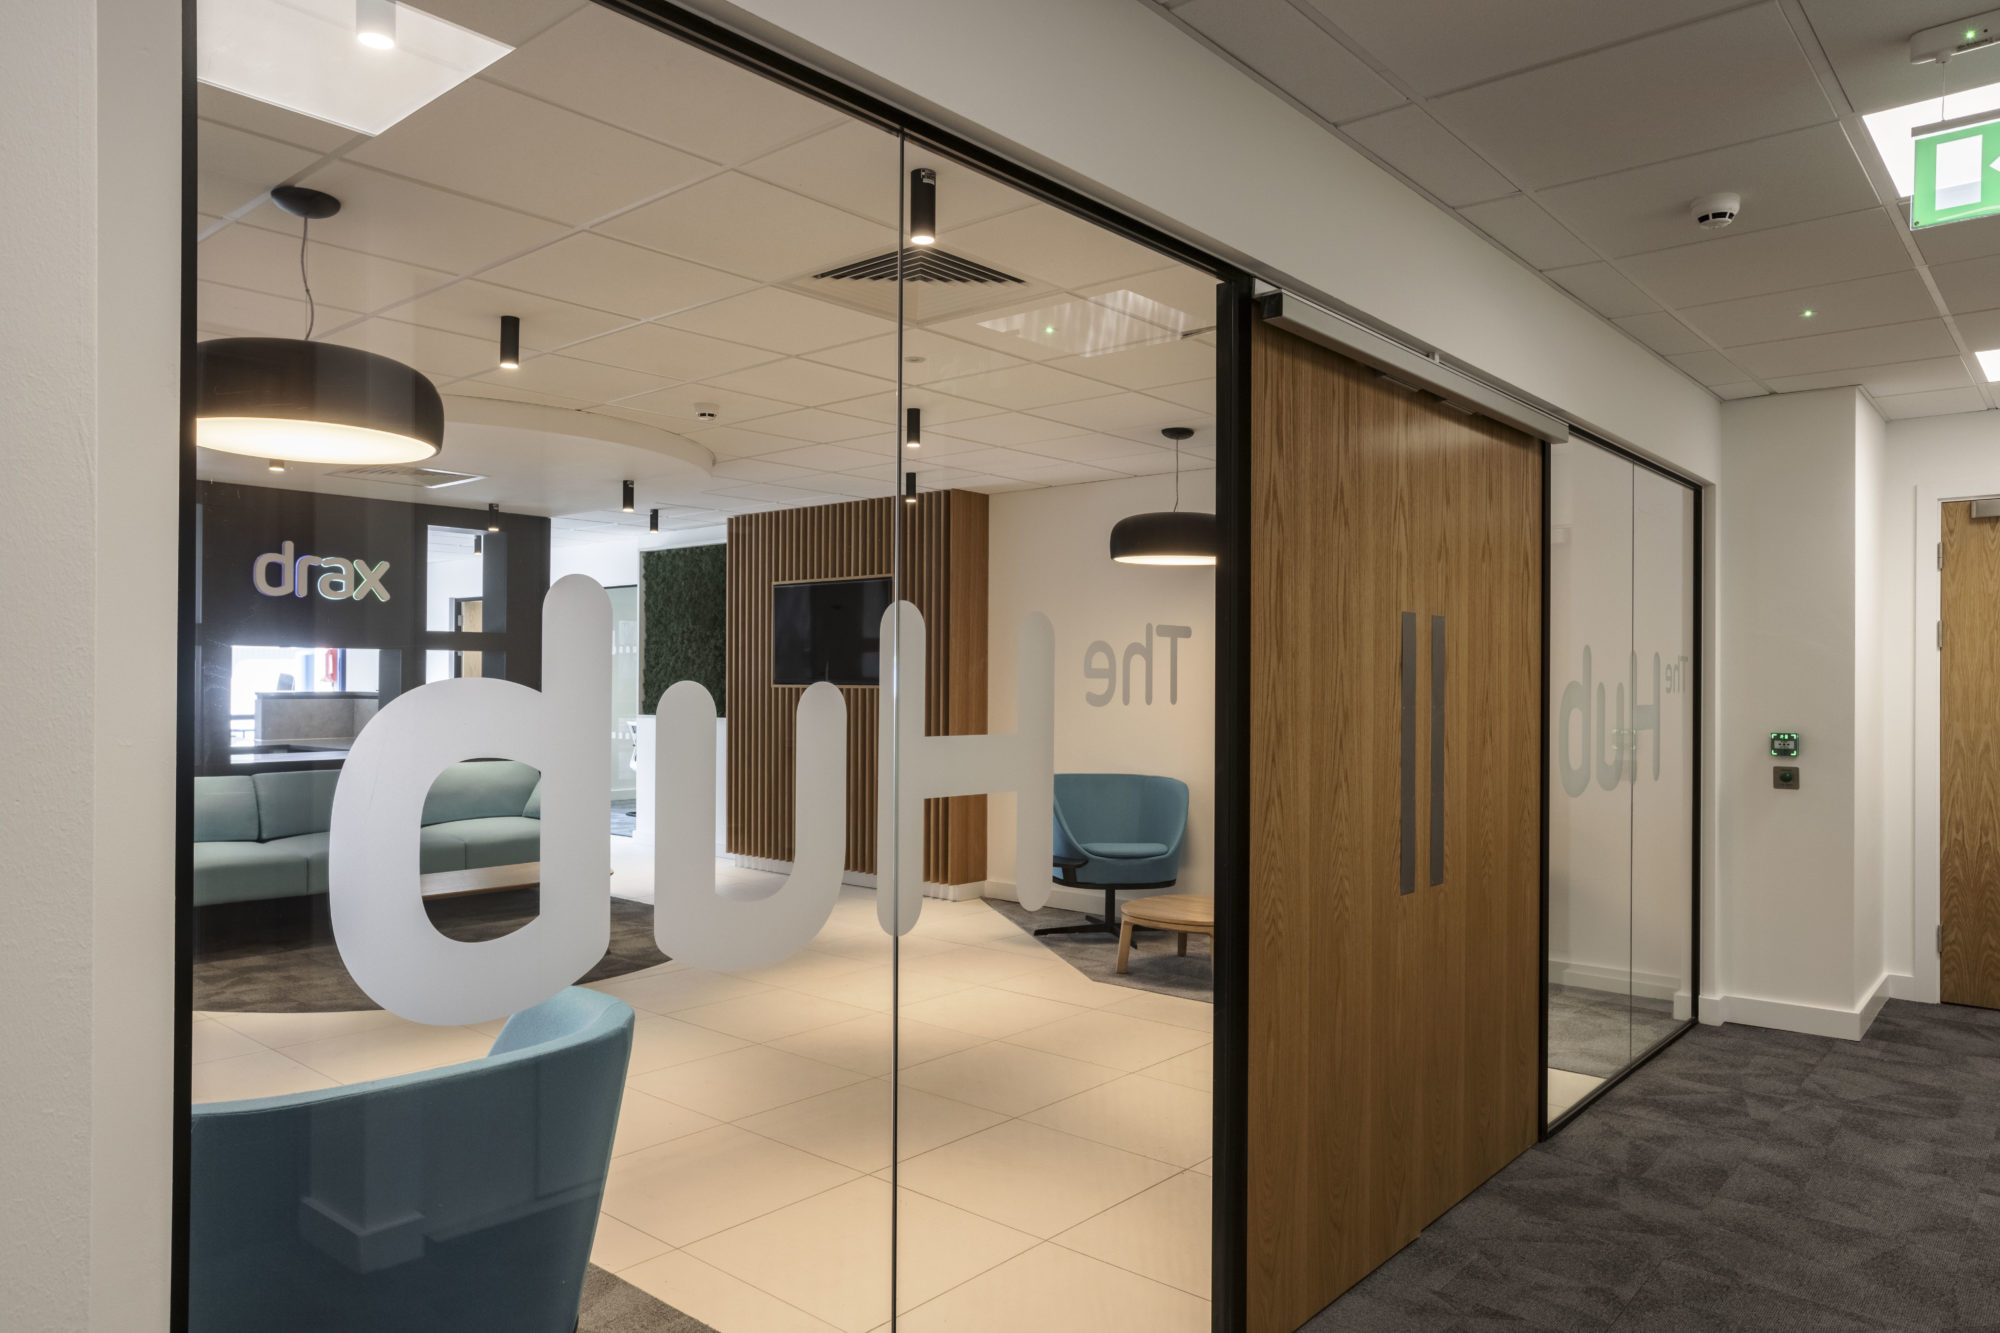 Drax office hub fit out